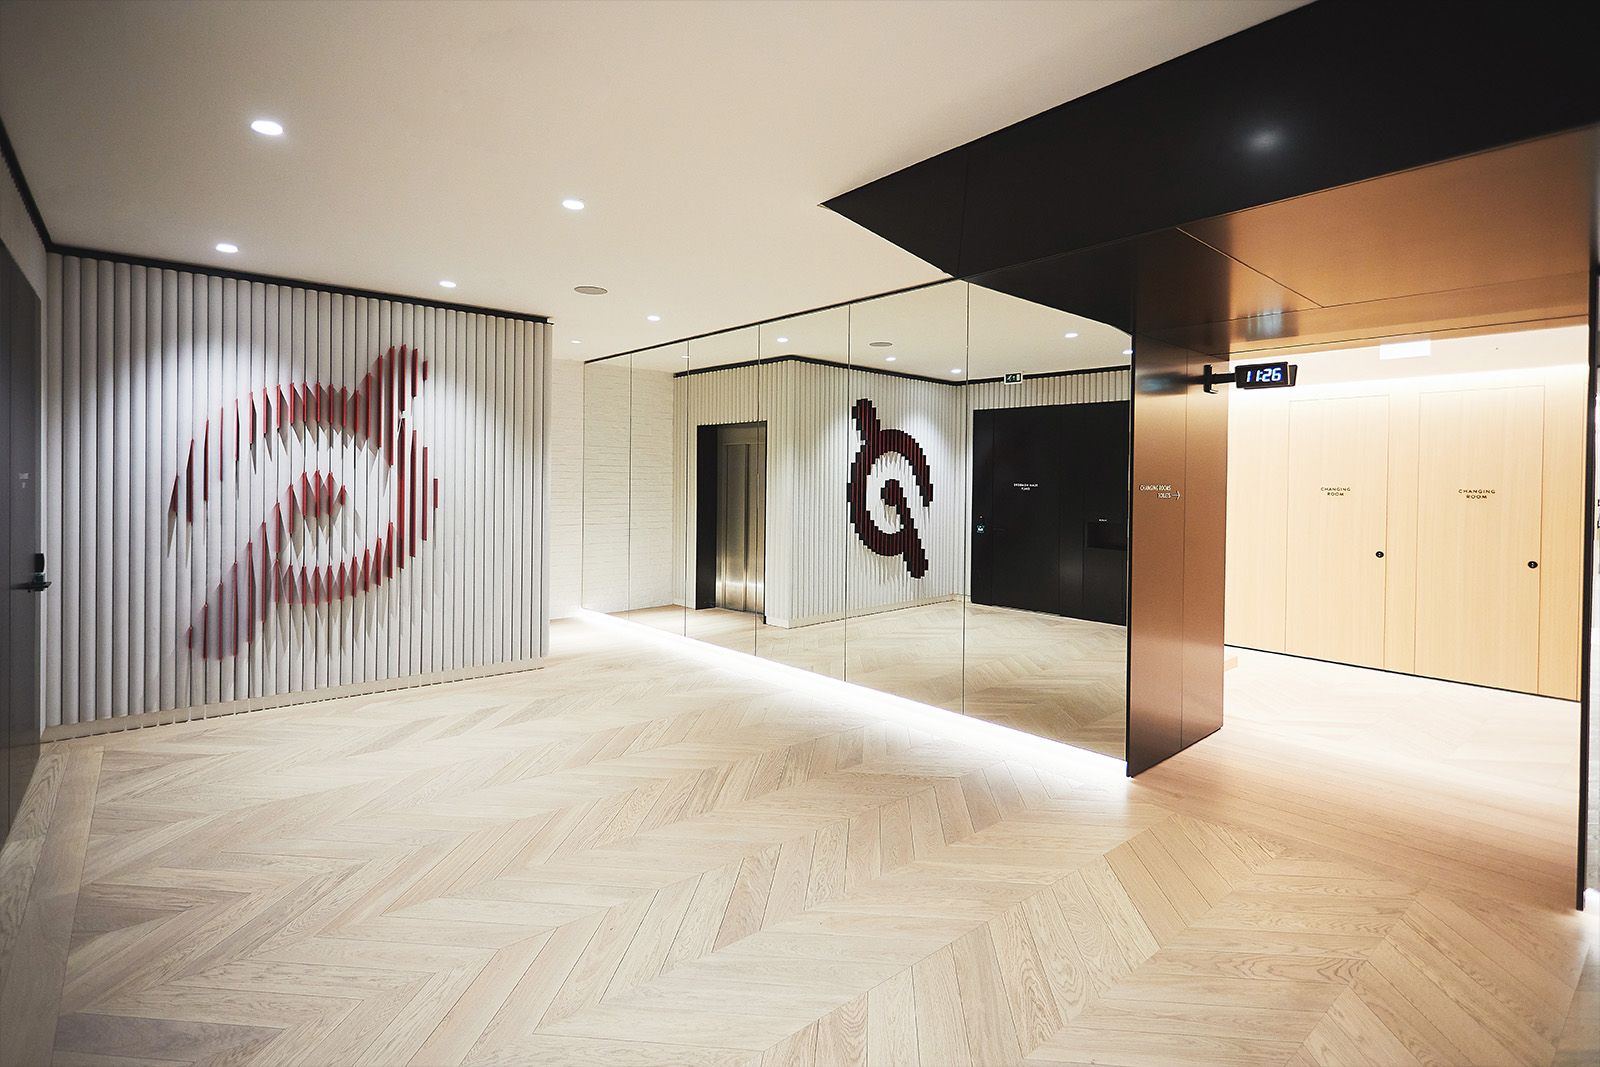 Peloton Studios London will open to members soon and here's what it looks like photo 6